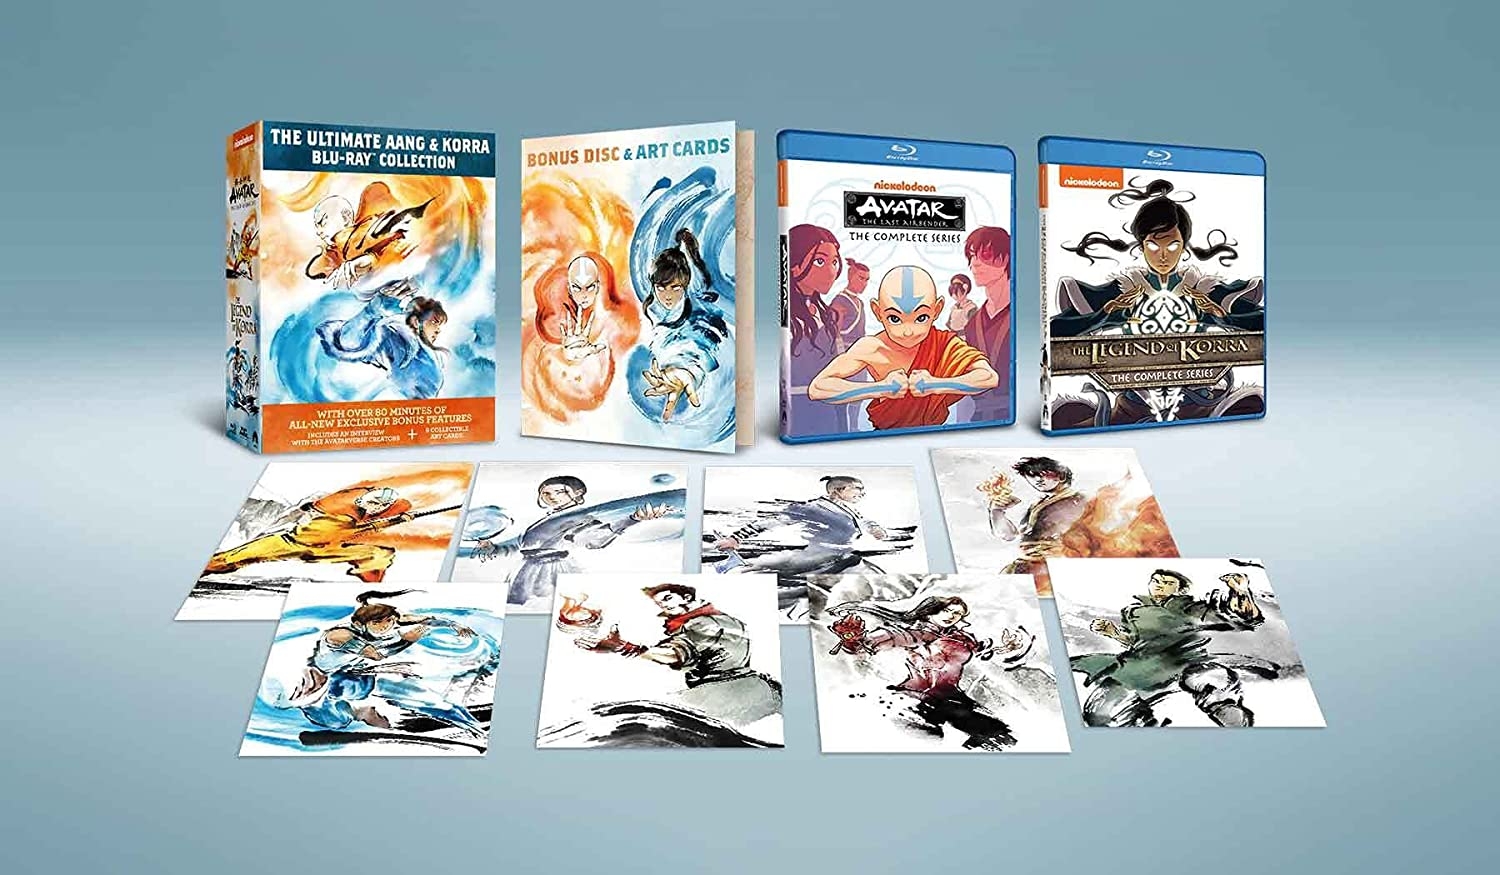 Avatar: The Last Airbender - Book 2: Earth - The Complete Collection (DVD,  2007, 5-Disc Set) for sale online